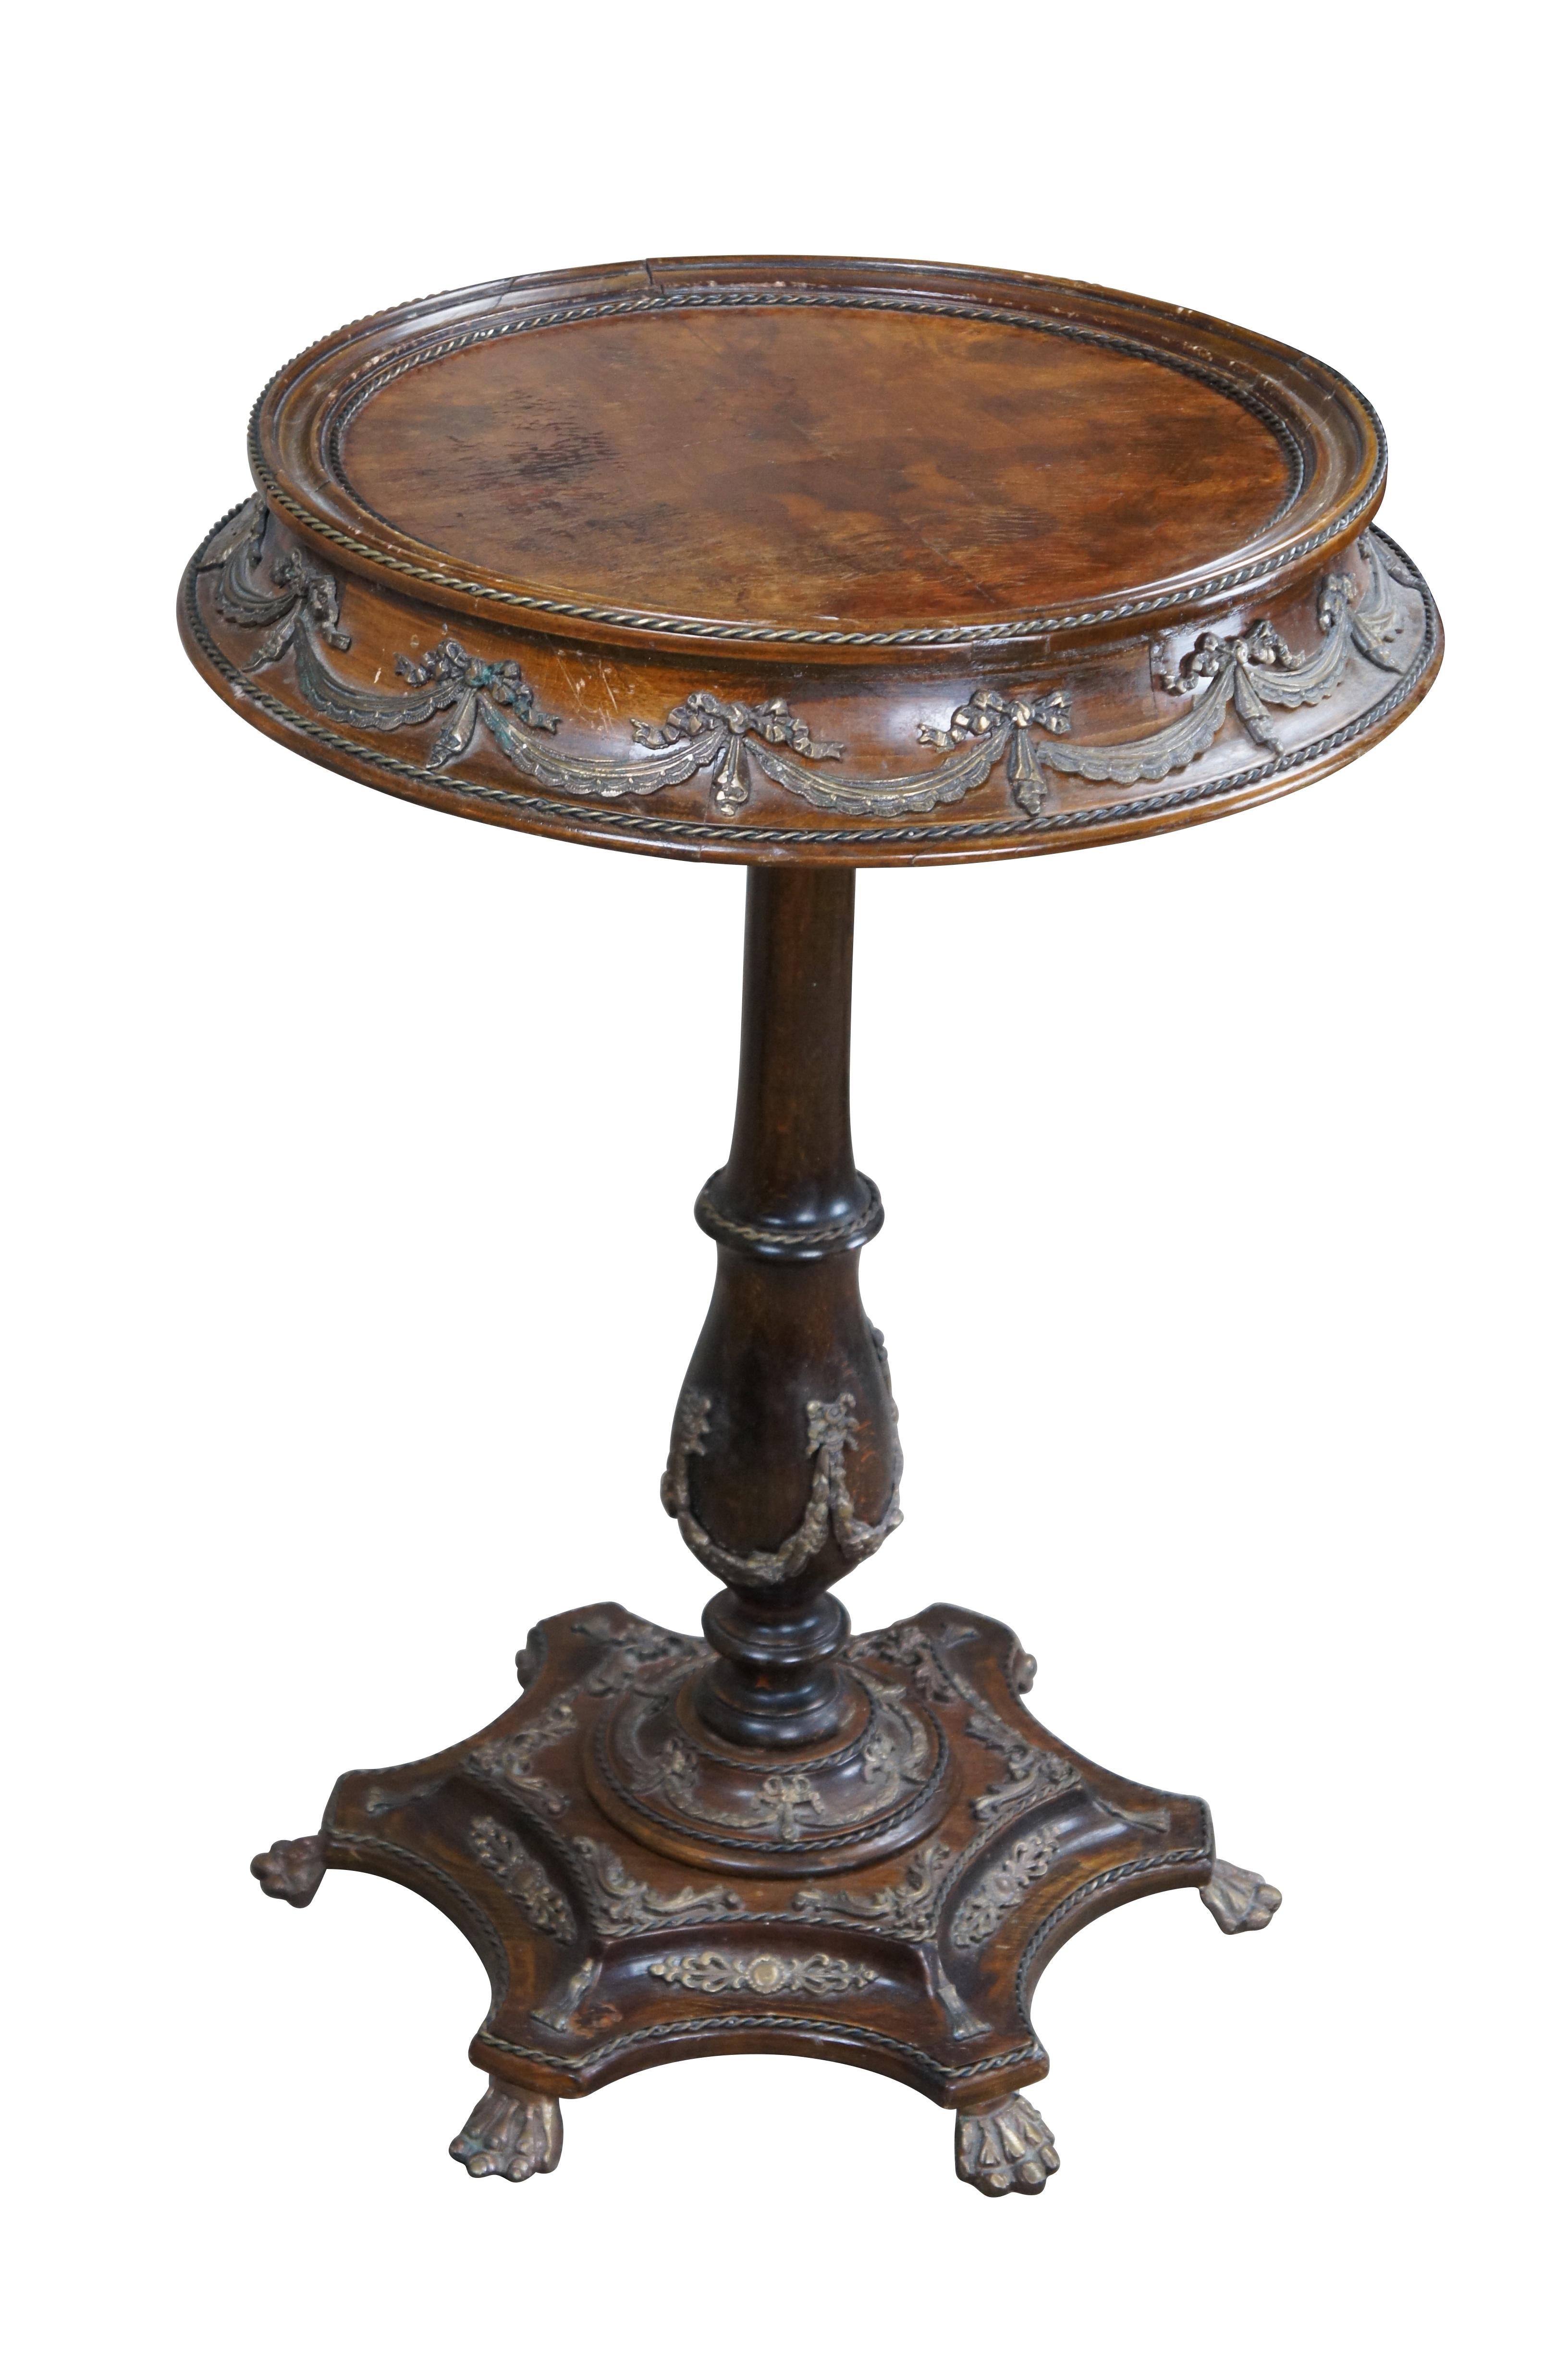 An impressive French Louis XIV style table, circa 1970s. Features a round form with inset matchbook veneered mahogany top, braised brass and bronze ormolu swags. The table is supported by a turned baluster leading to a hexagram base ornate ormolu